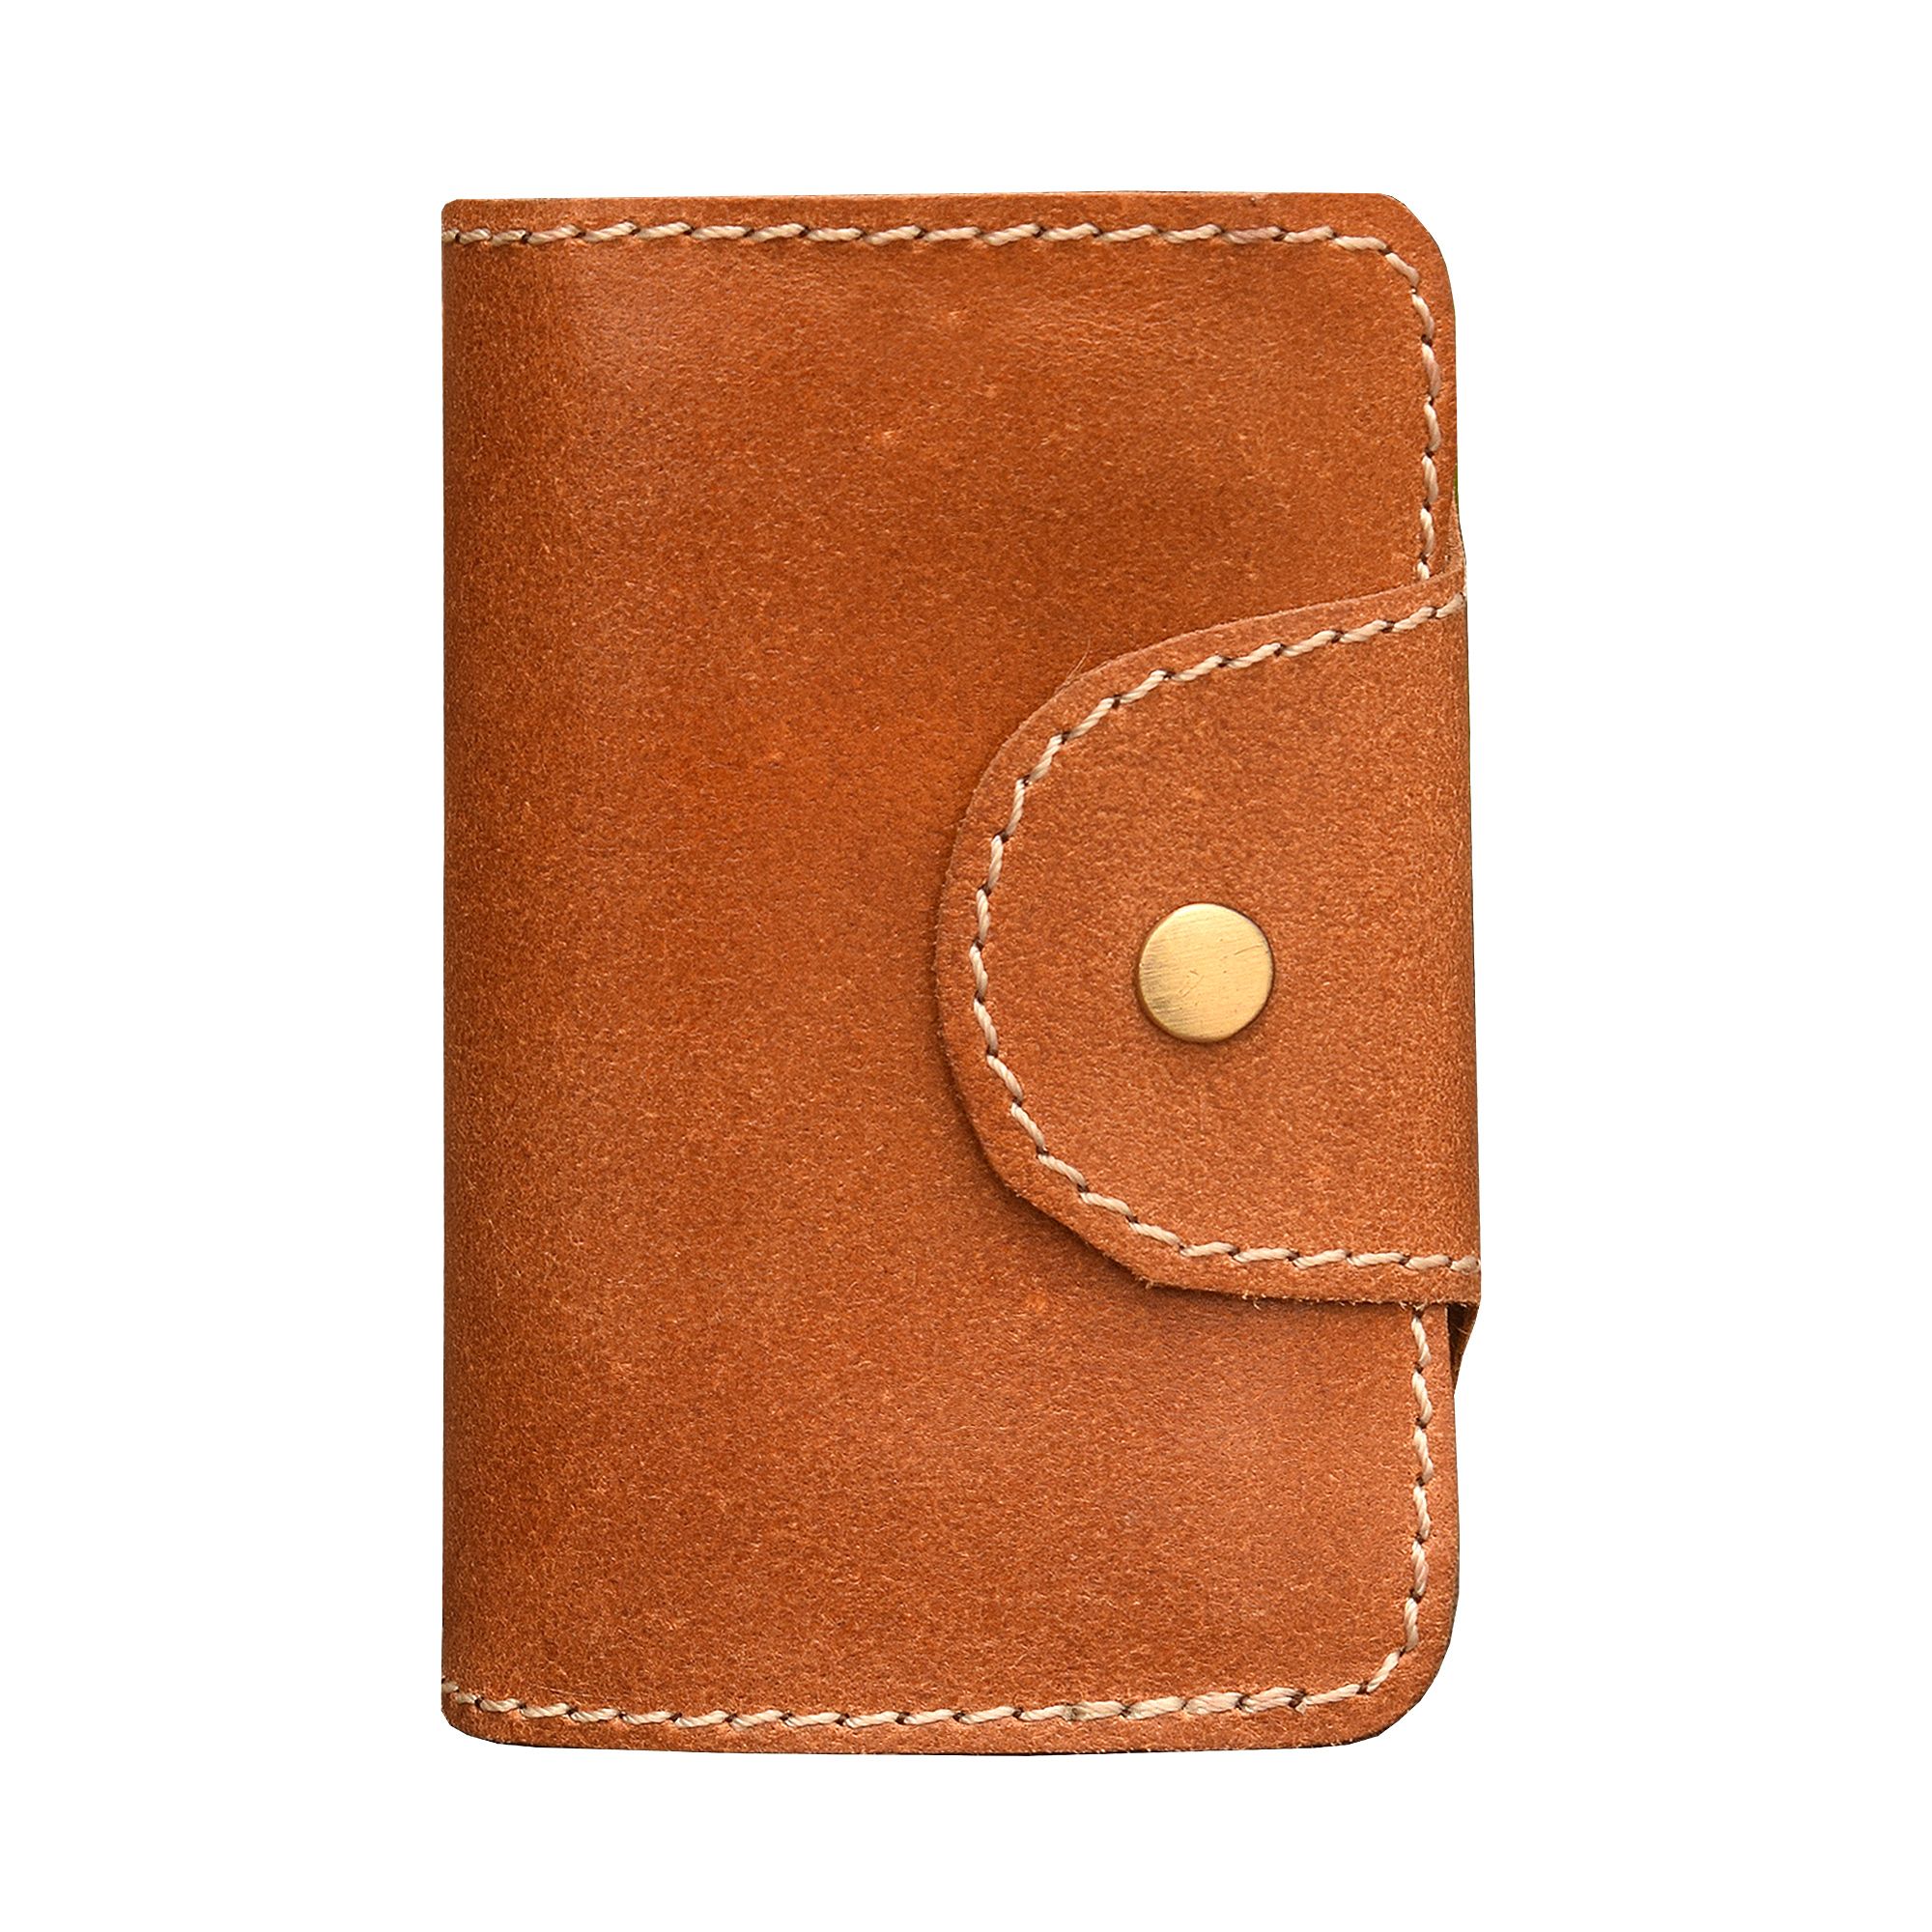 Solid Document Holder ABYS Genuine Leather Passport Wallet